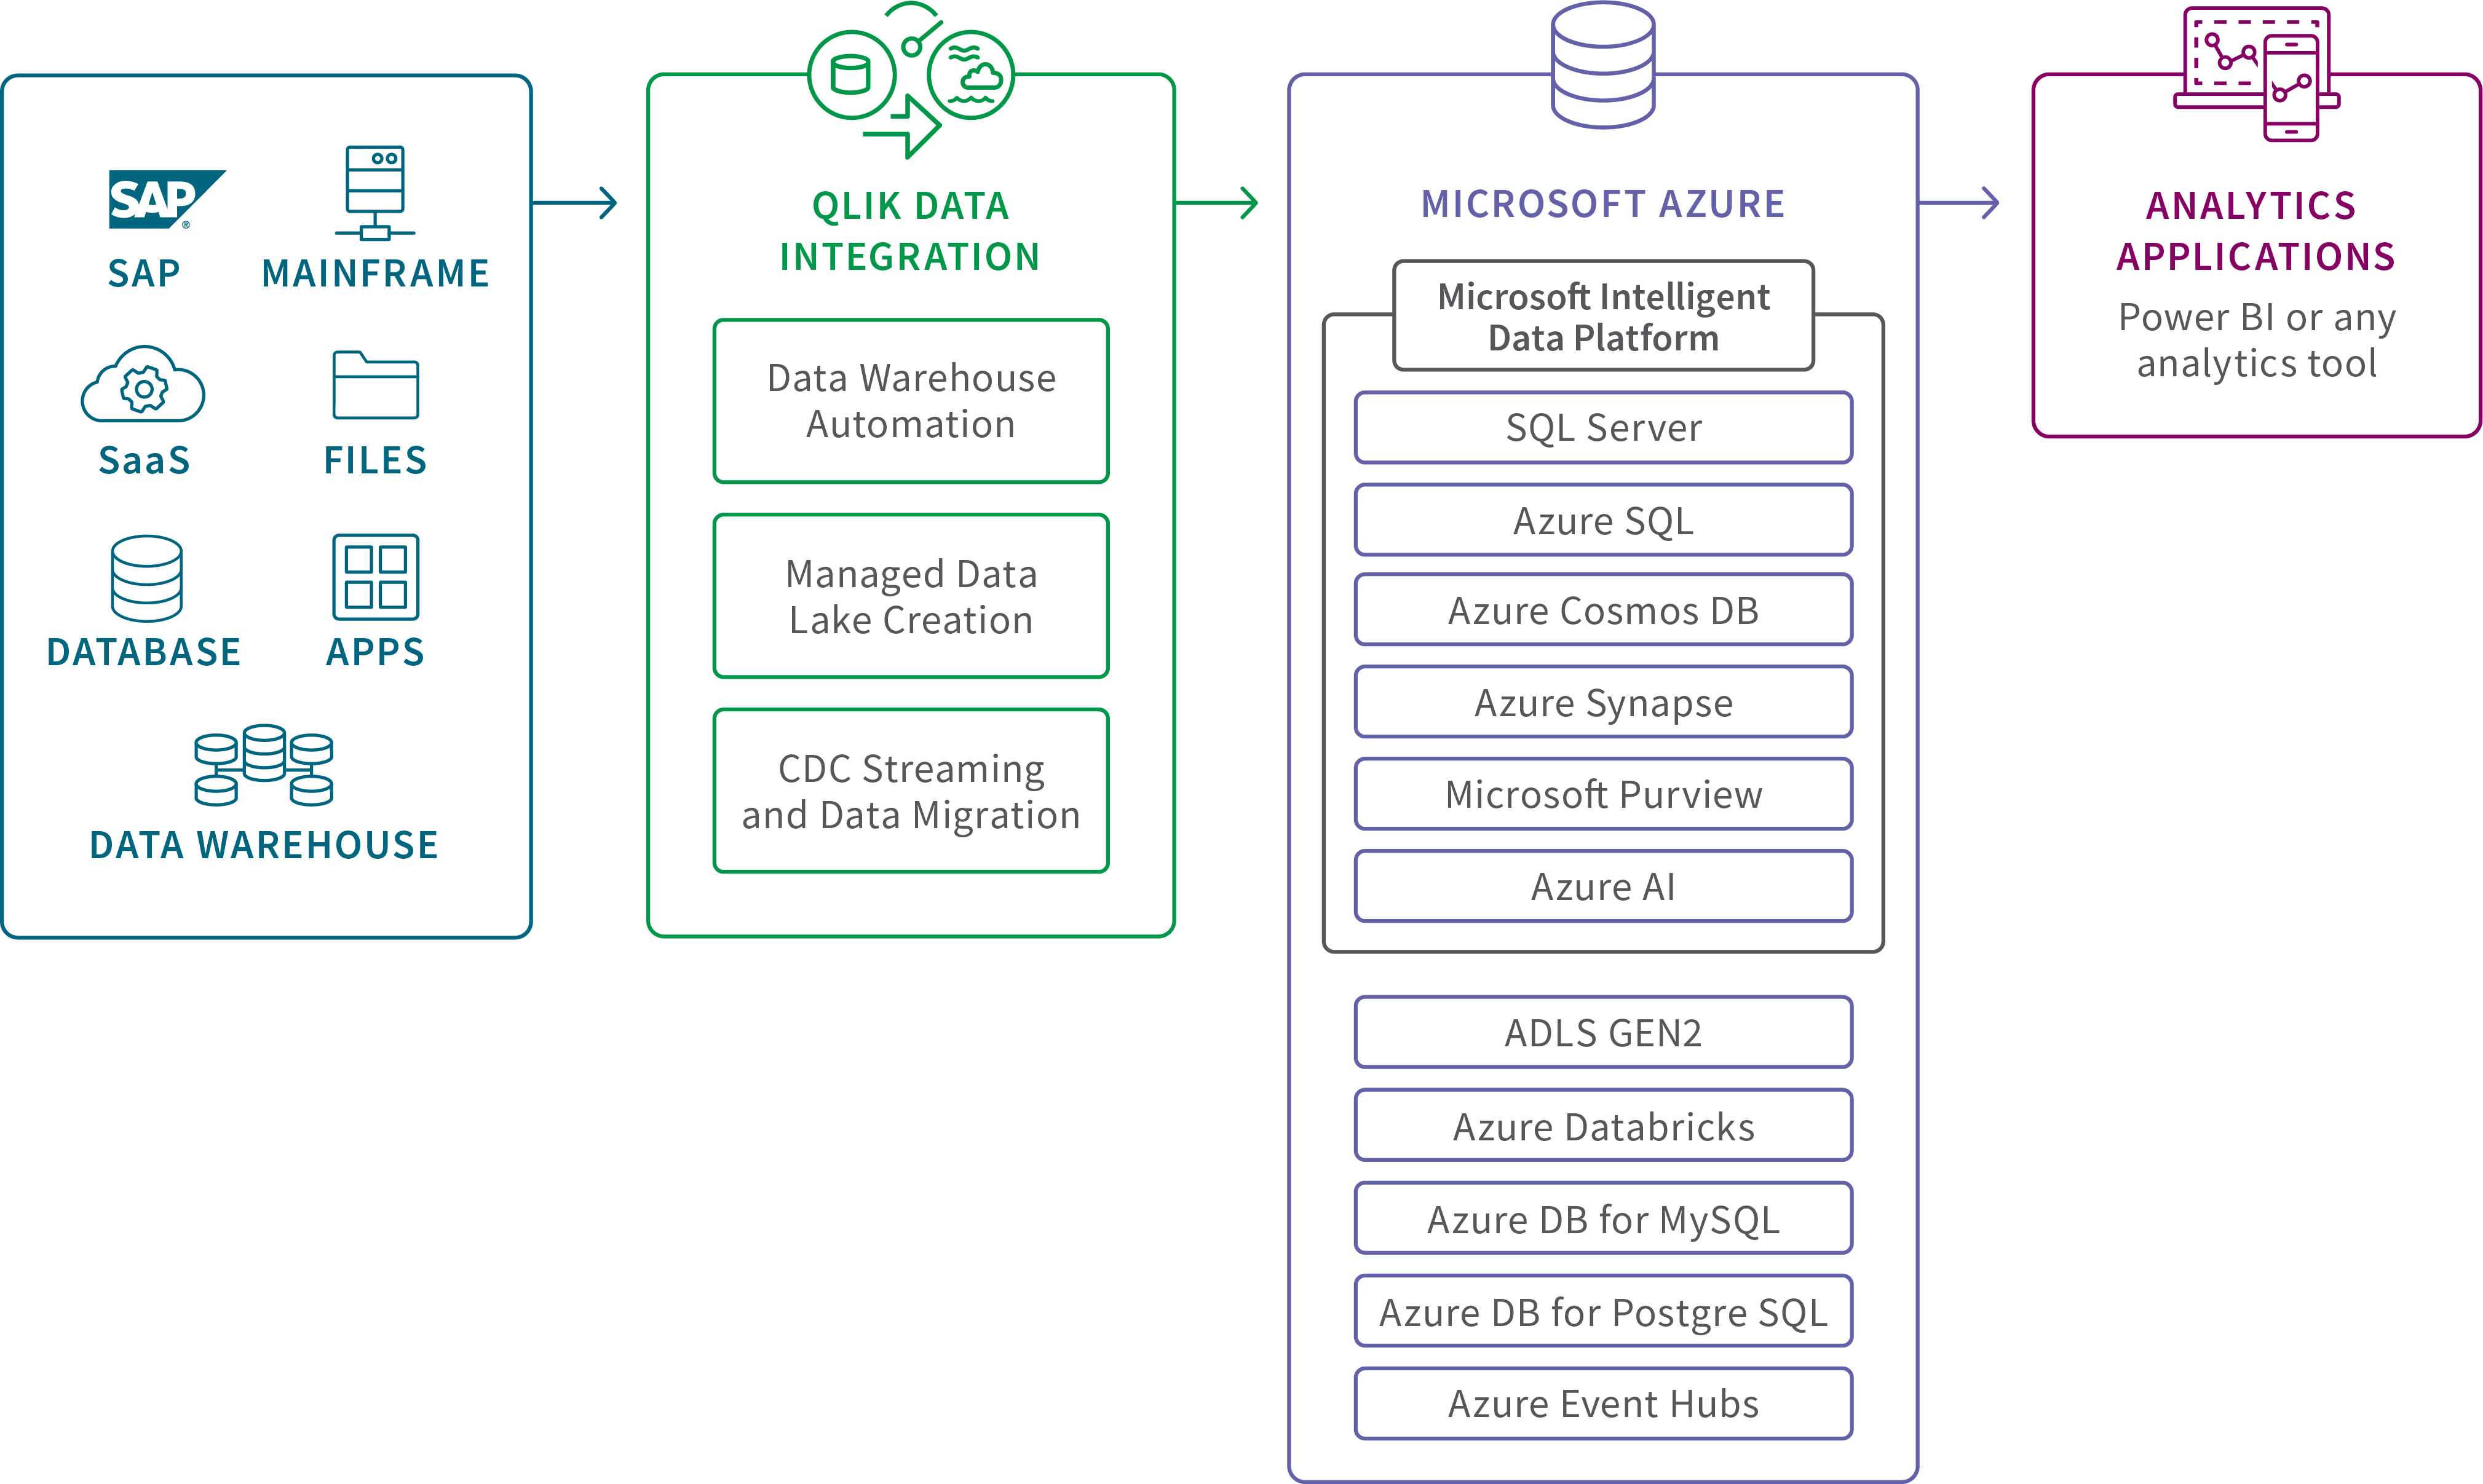 Diagram showing how data is processed from a data warehouse into analytics applications.